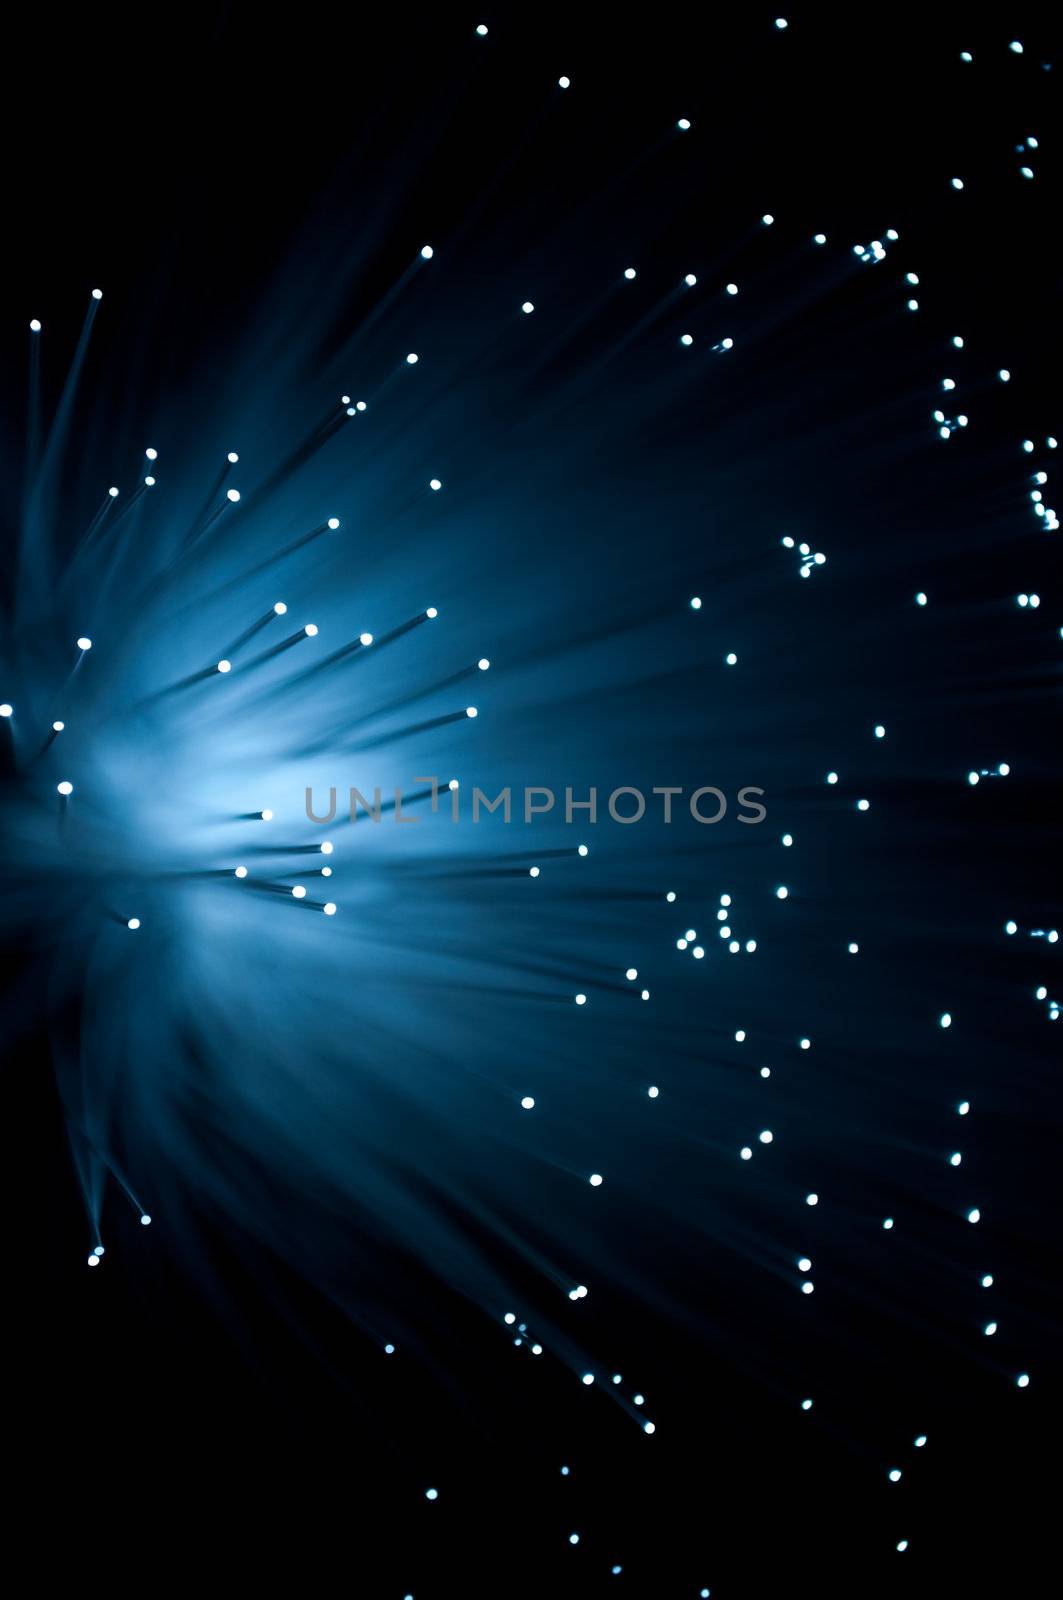 Abstract style capturing the ends of blue fibre optic light strands against a black background.